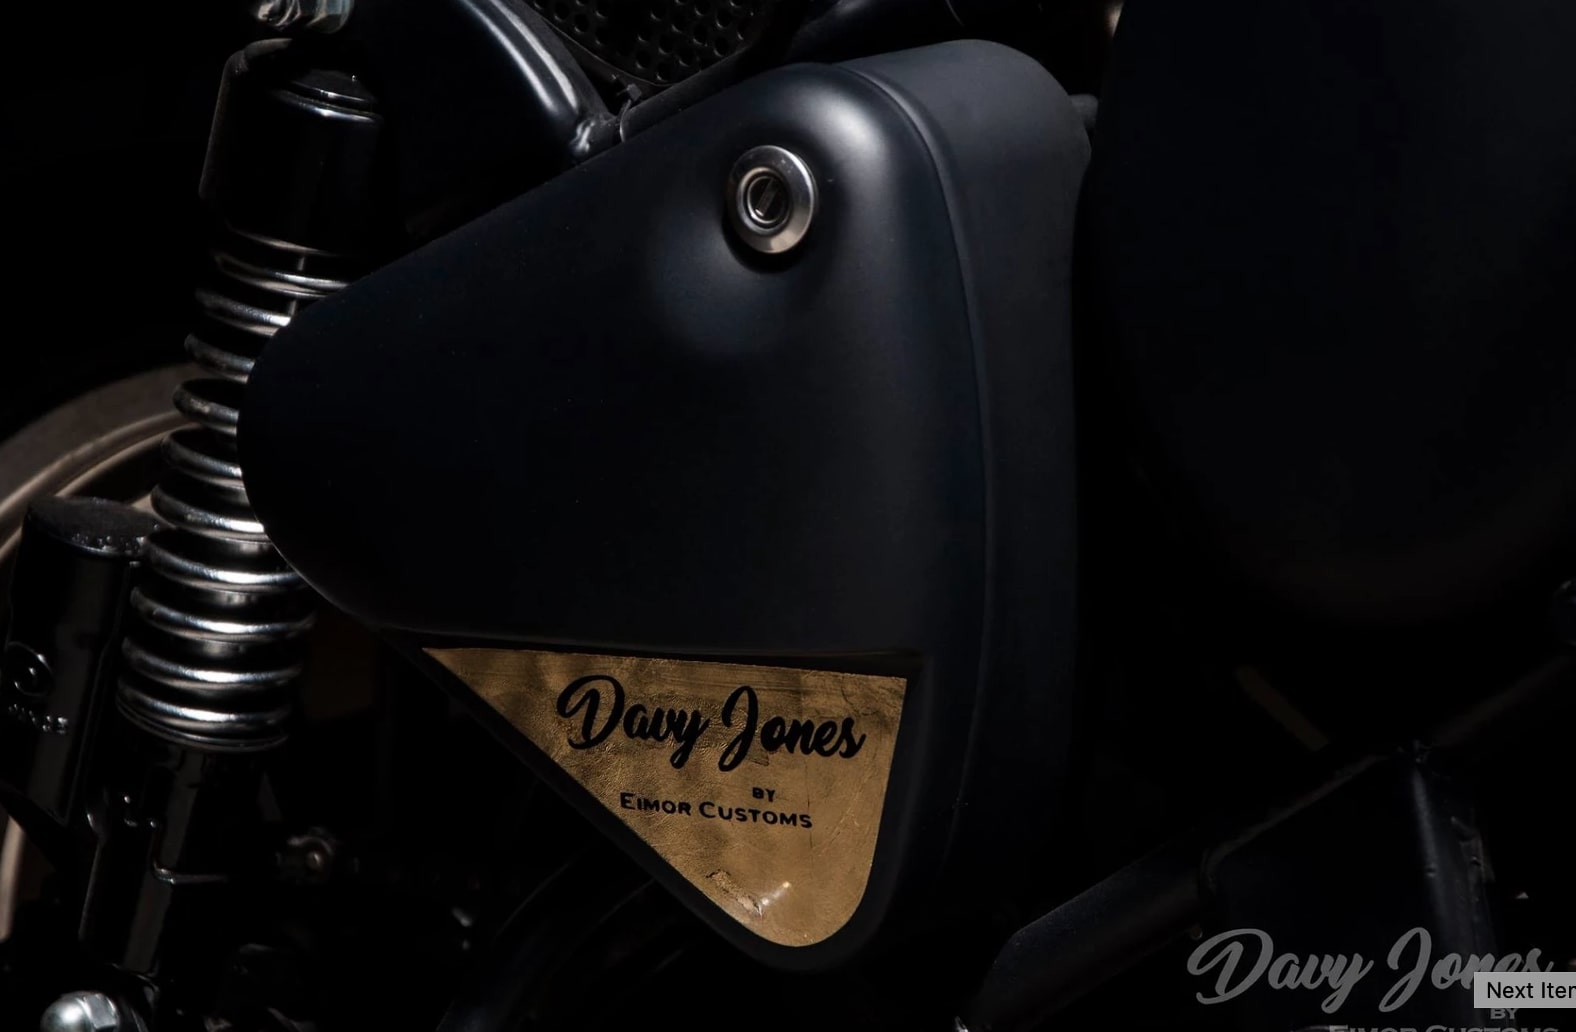 EIMOR Royal Enfield TB 350 Davy Jones Edition Details and Photos - landscape